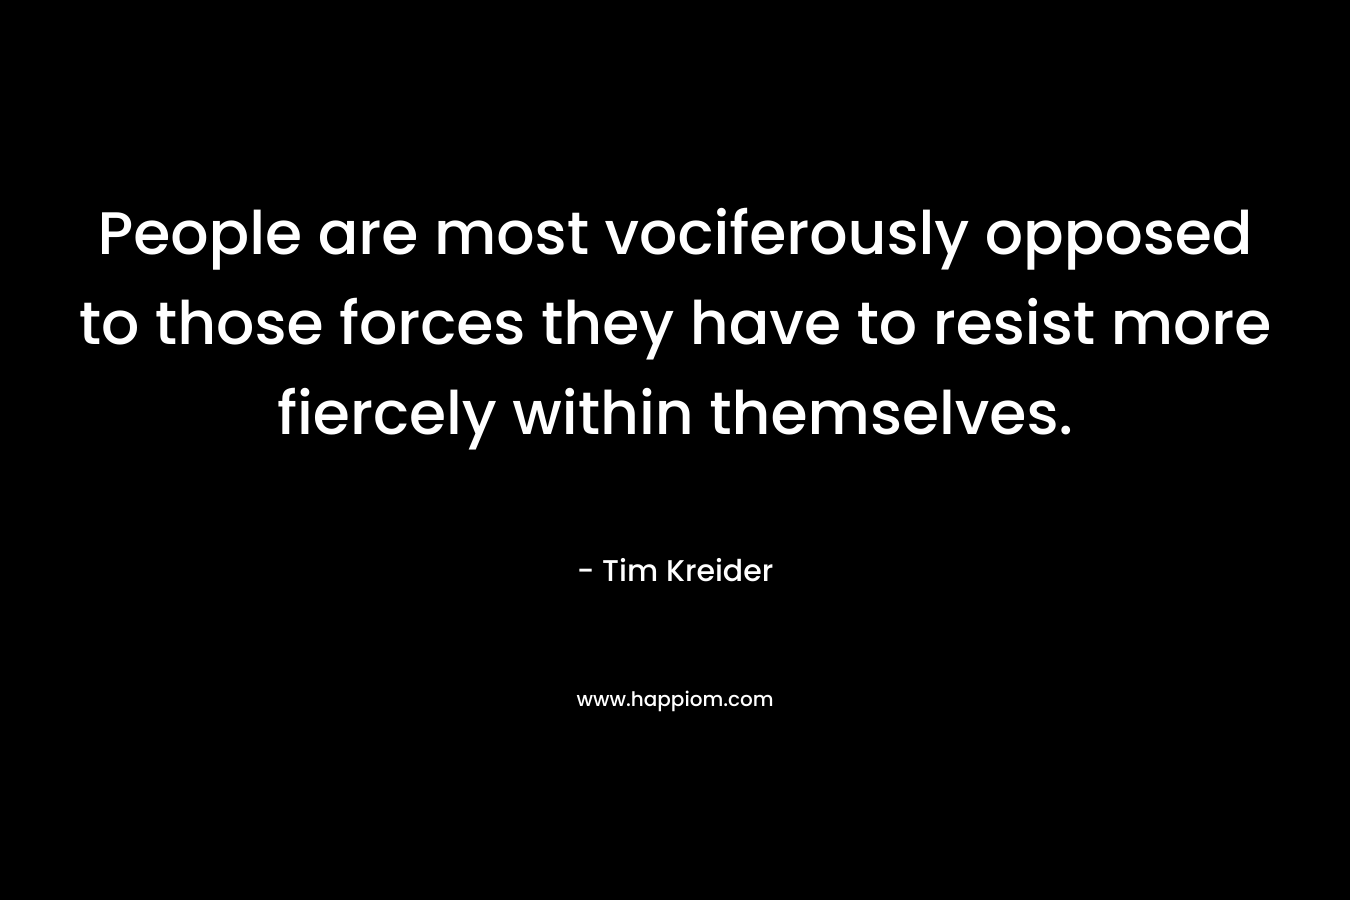 People are most vociferously opposed to those forces they have to resist more fiercely within themselves.